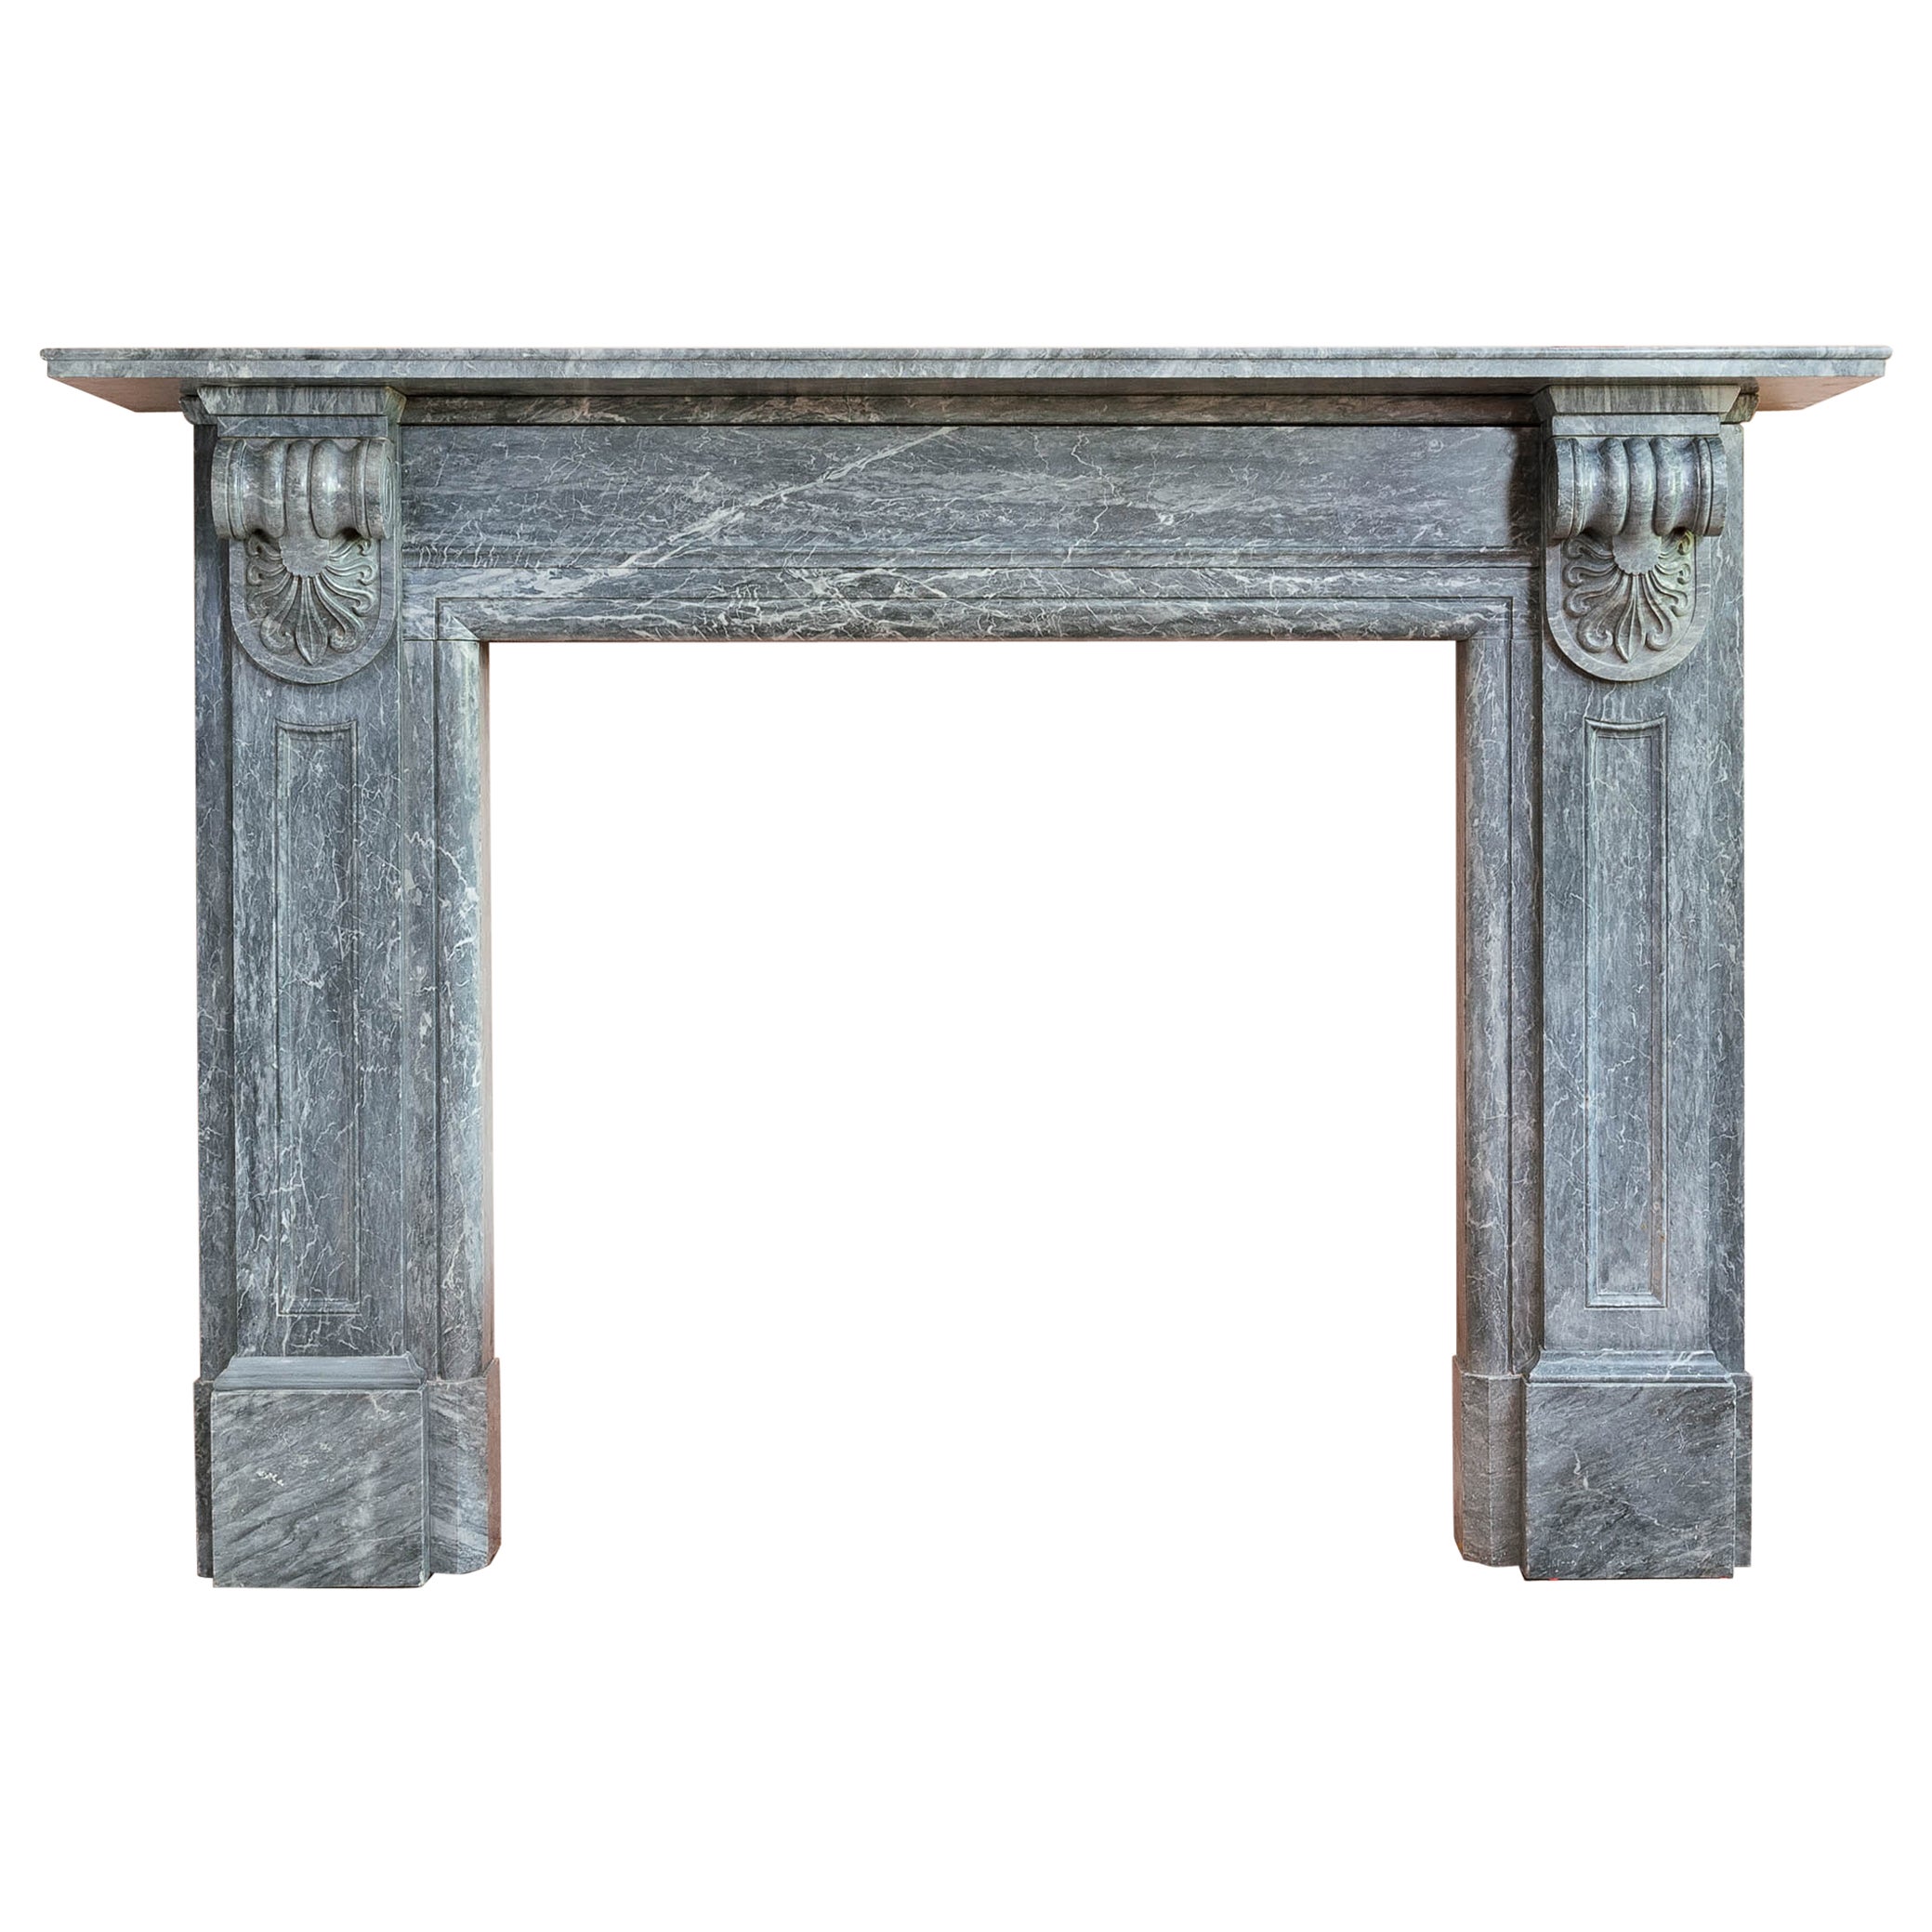 An Early 19th Century Neo-Grecian Bardiglio Marble Fireplace